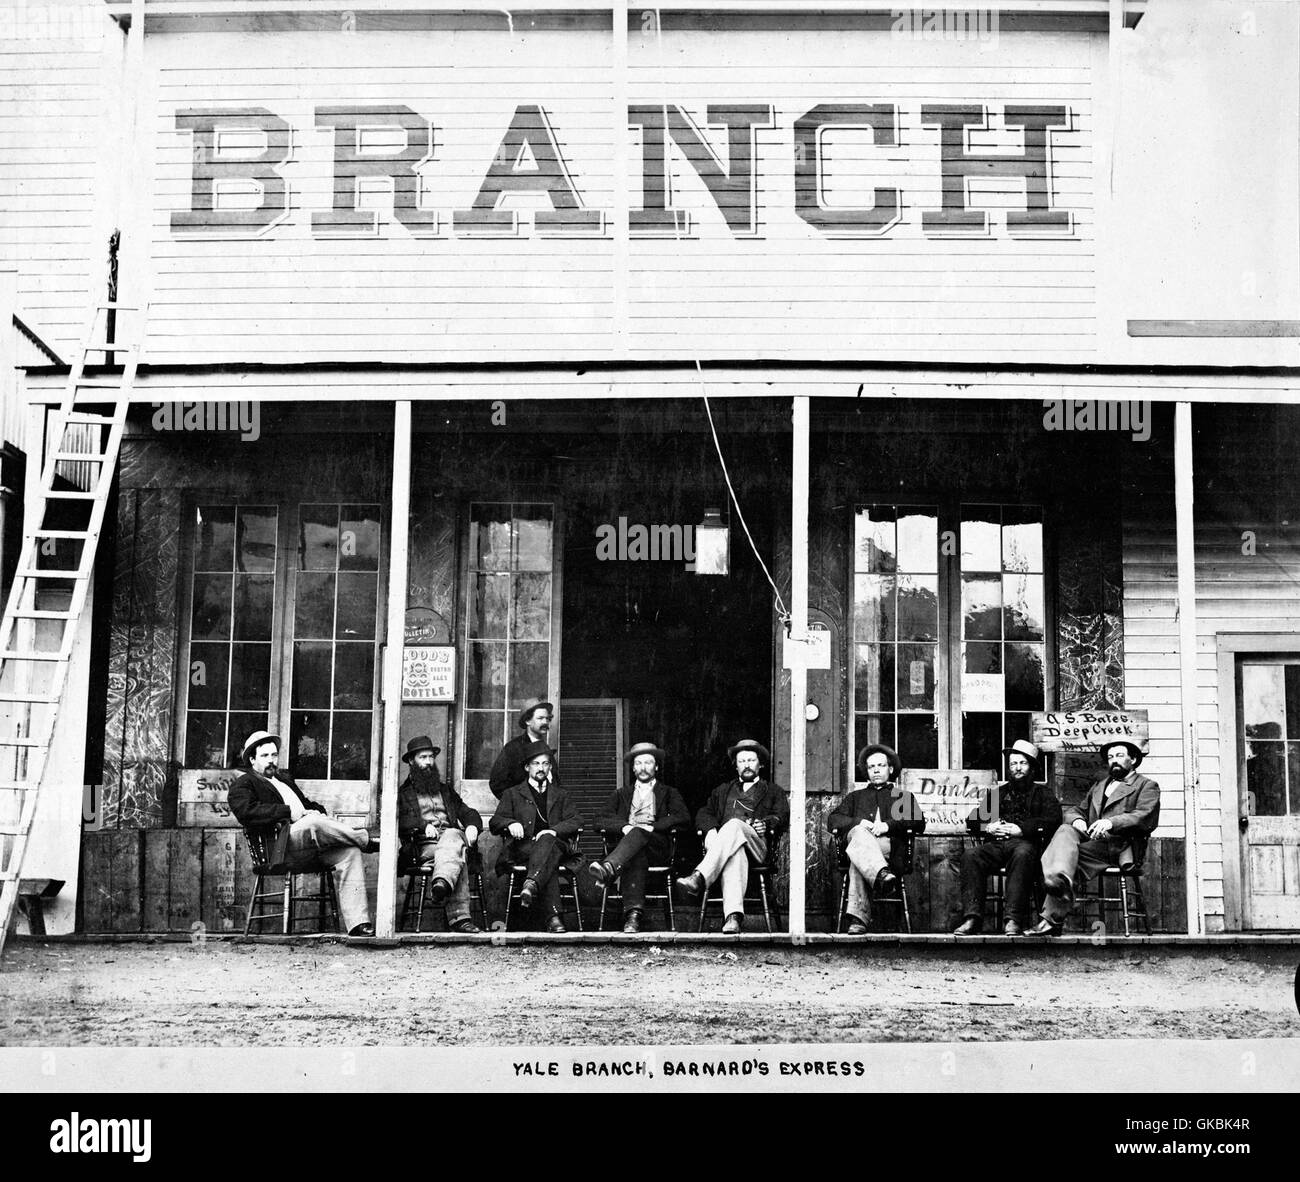 BARNARD'S EXPRESS. Employees at the  Candian stage coach company outside their Yale branch in British Columbia about 1867. Photo Frederick Dally/University of British Columbia  Creator: Dally, Frederick  Date Created: [1867 or 1868]  Source: Original Format: University of British Columbia. Library. Rare Books and Special Collections. Langmann Collection.  Permanent URL: http://digitalcollections.library.ubc.ca/cdm/ref/collection/langmann/id/309  Project Website:http://digitalcollections.library.ubc.ca/cdm/landingpage/collection/langmann Stock Photo